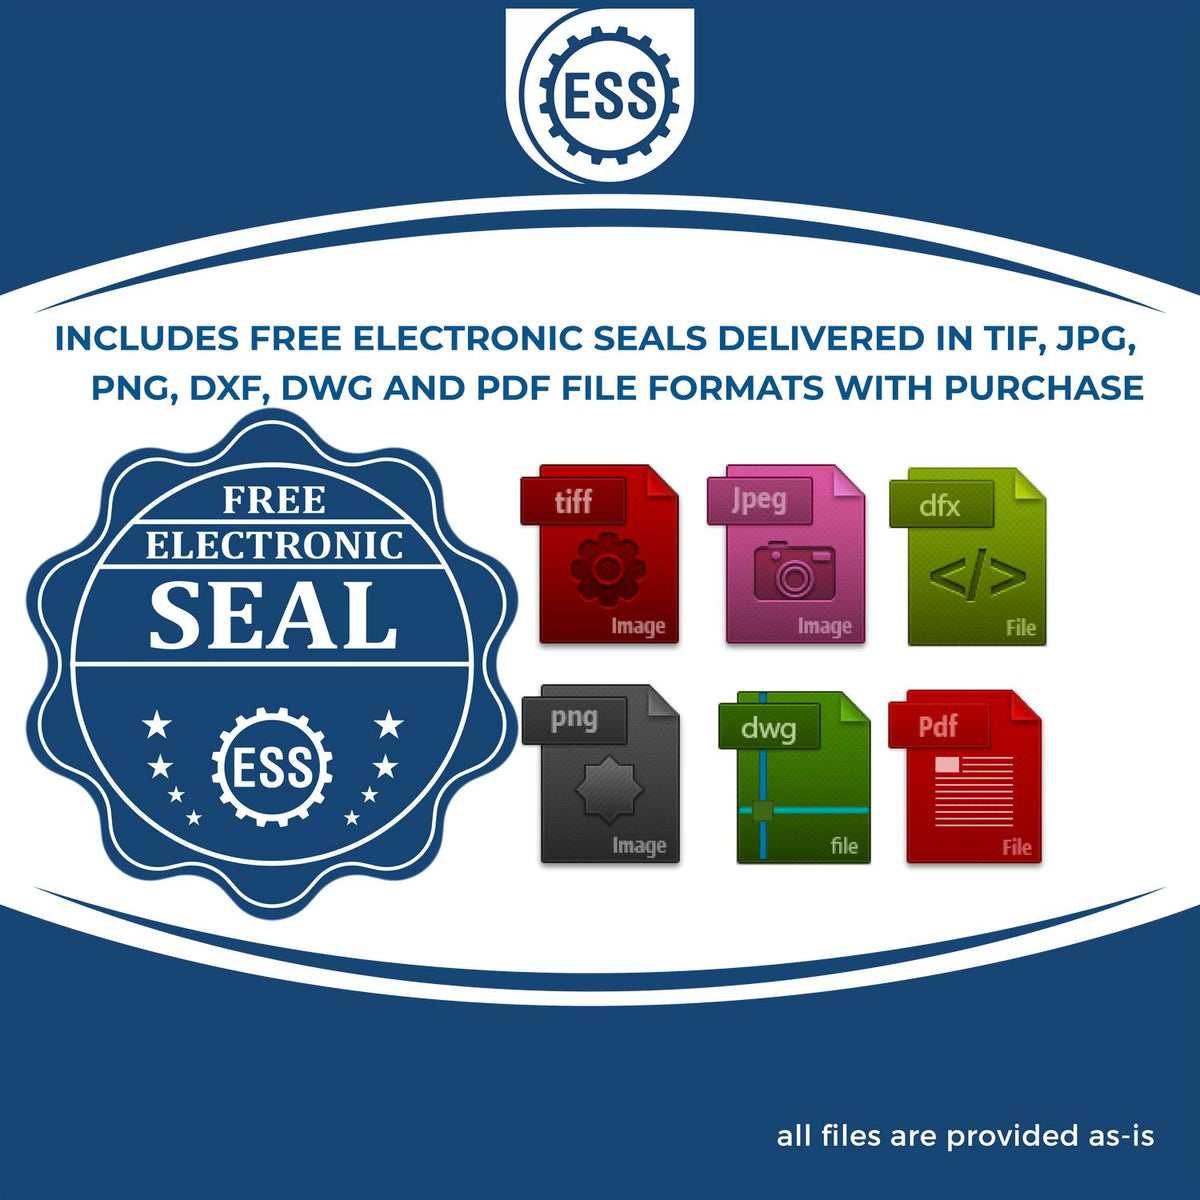 An infographic for the free electronic seal for the Self-Inking New Mexico Landscape Architect Stamp illustrating the different file type icons such as DXF, DWG, TIF, JPG and PNG.